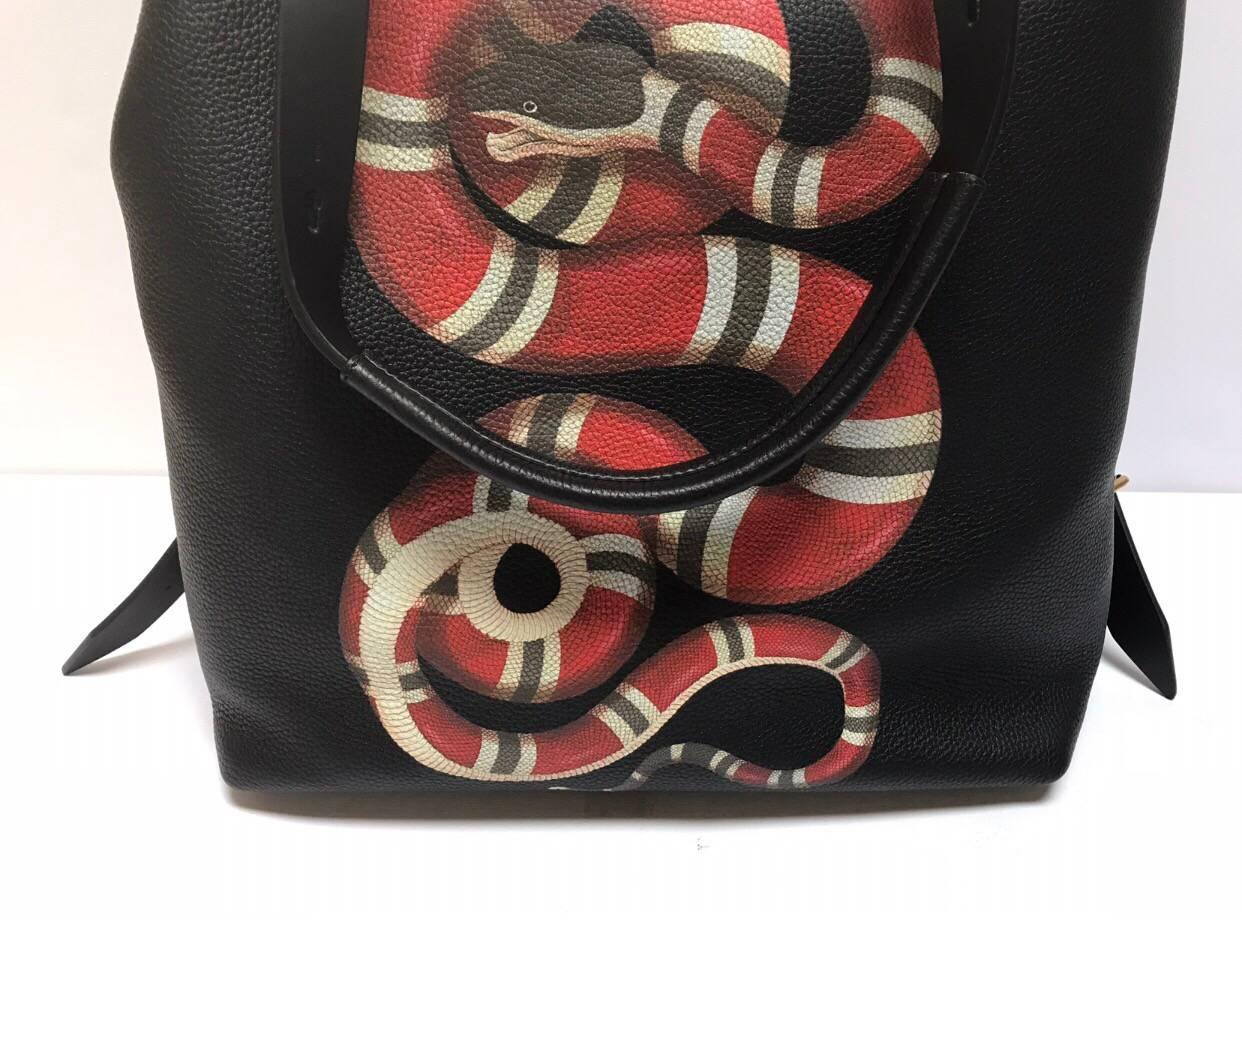 GUCCI 
Season Fw17

A backpack with adjustable shoulder straps and top handle that allows it to be worn in two additional ways: as a tote or a shoulder bag. The leather back straps can be adjusted and secured with a buckle and stud closure to create